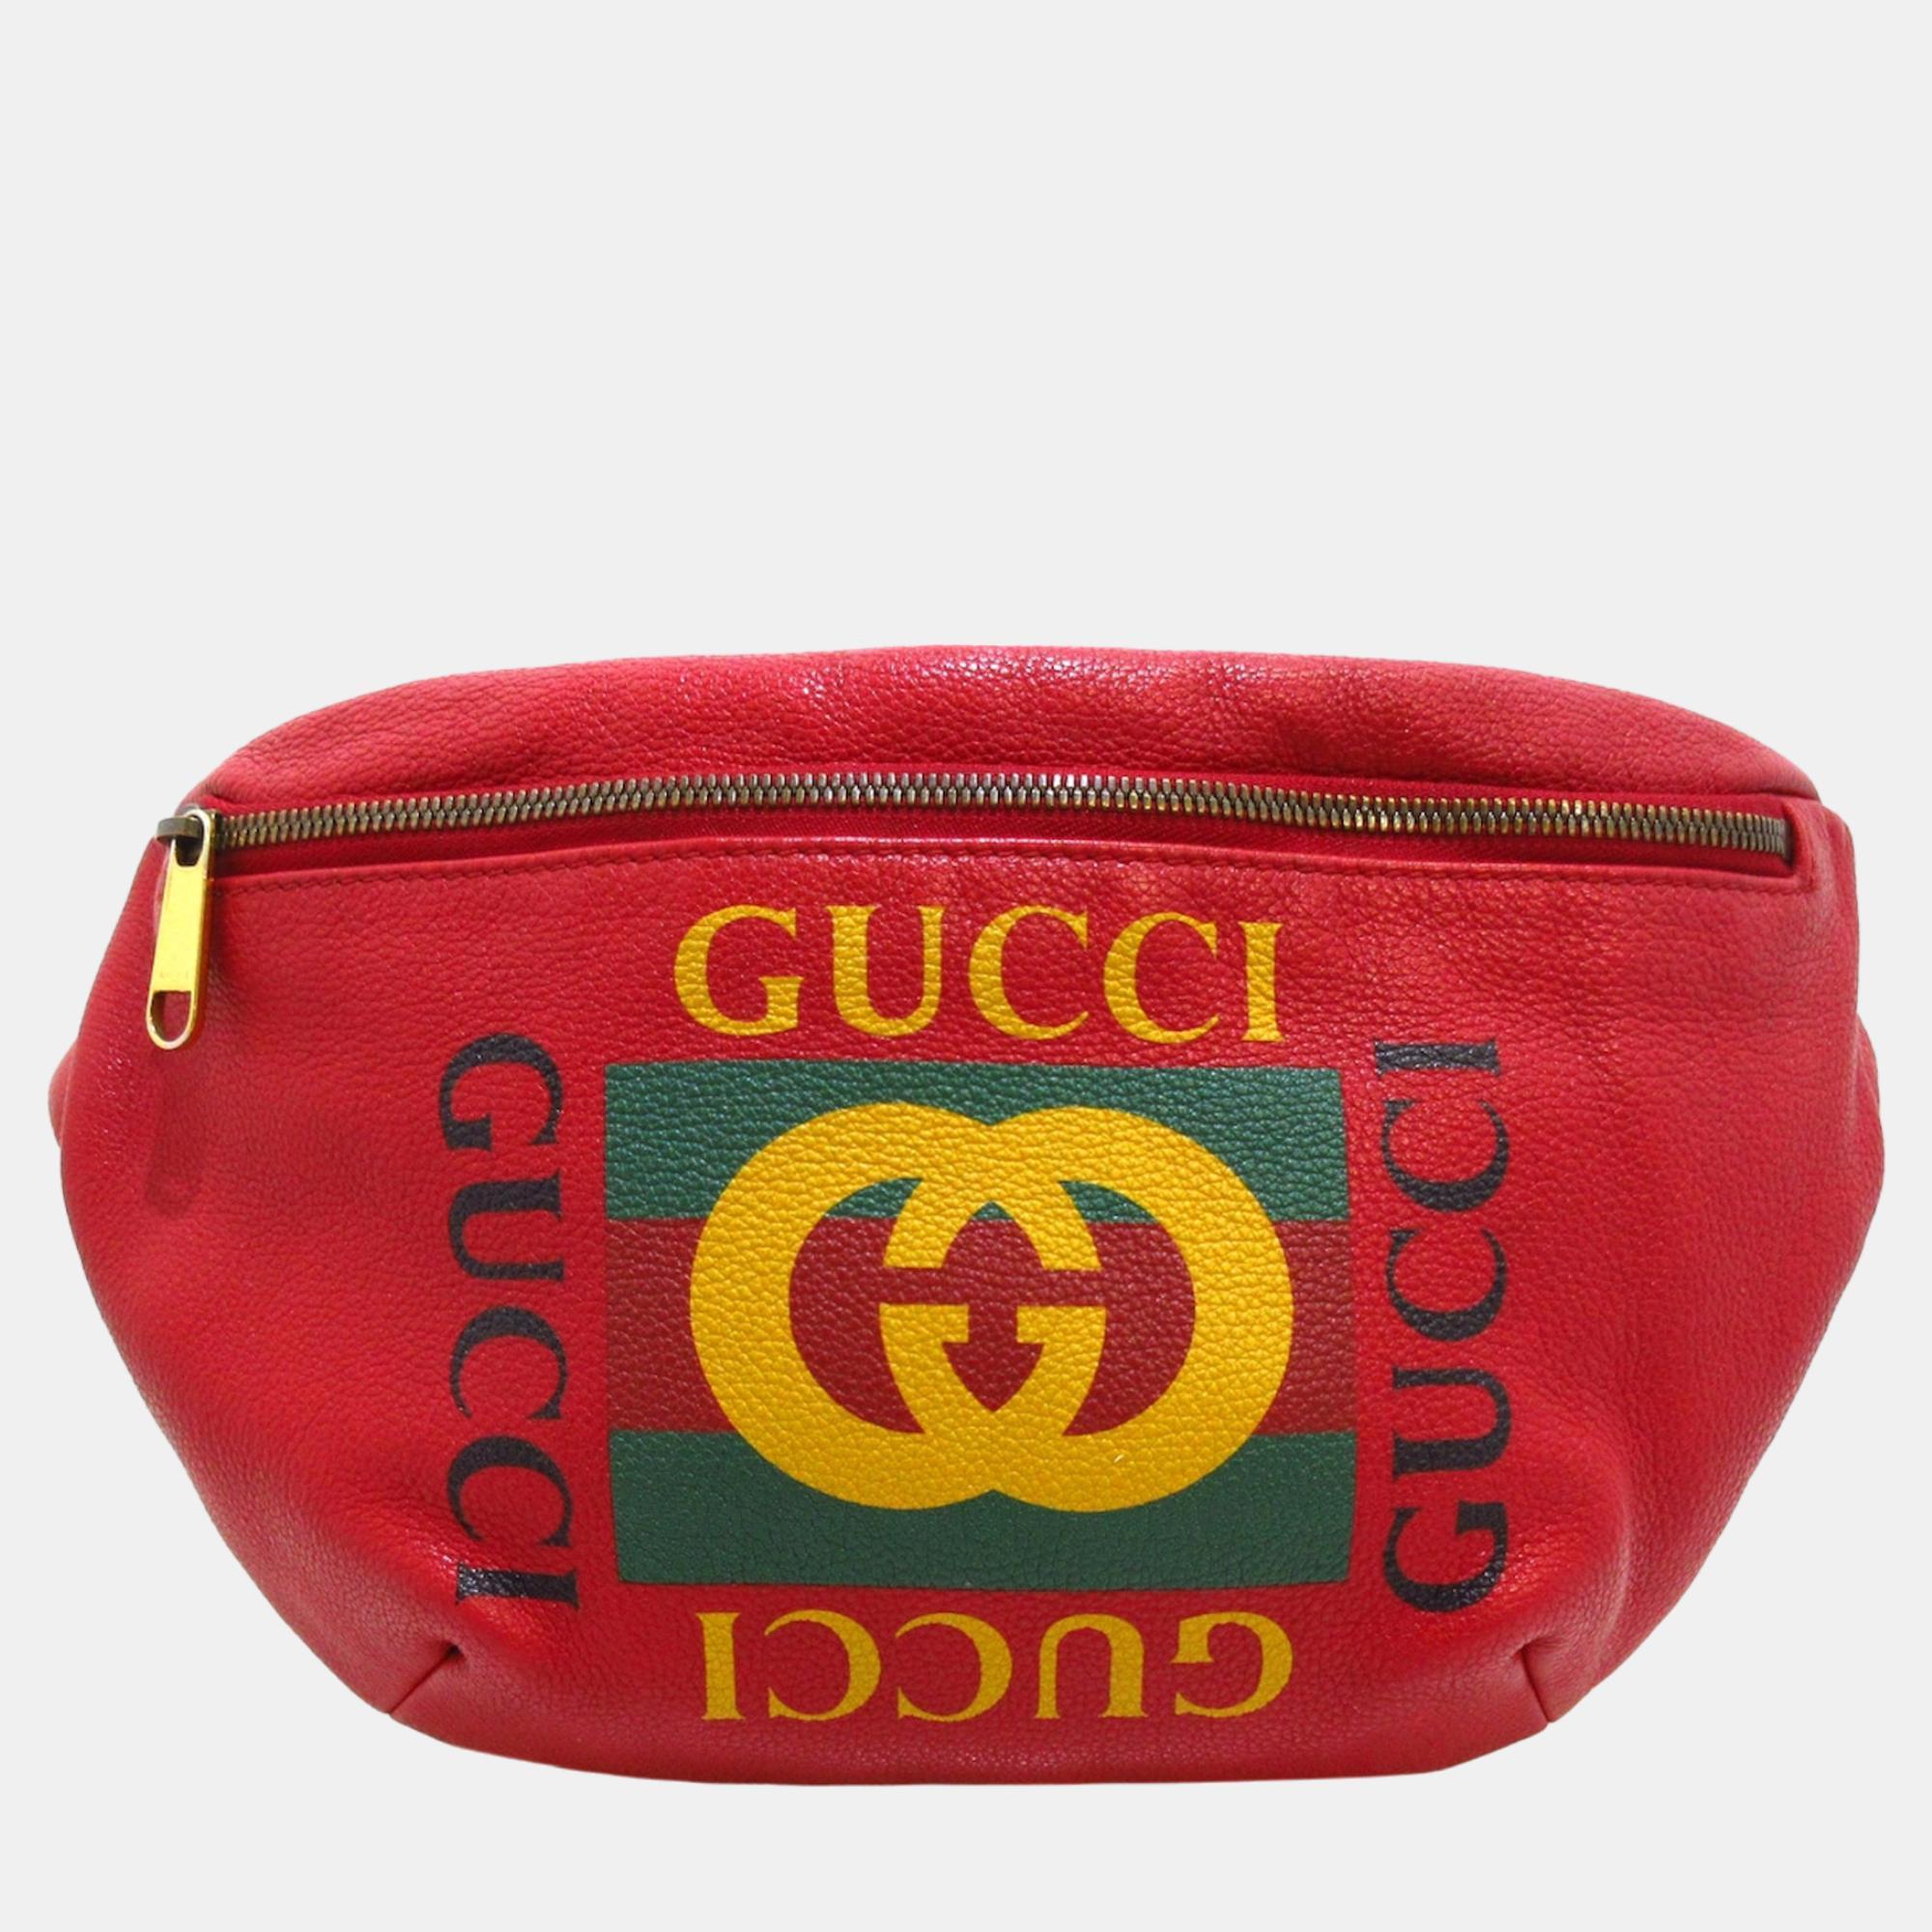 This belt bag features a printed leather body a canvas waist strap with buckle closure and a front zip closure.